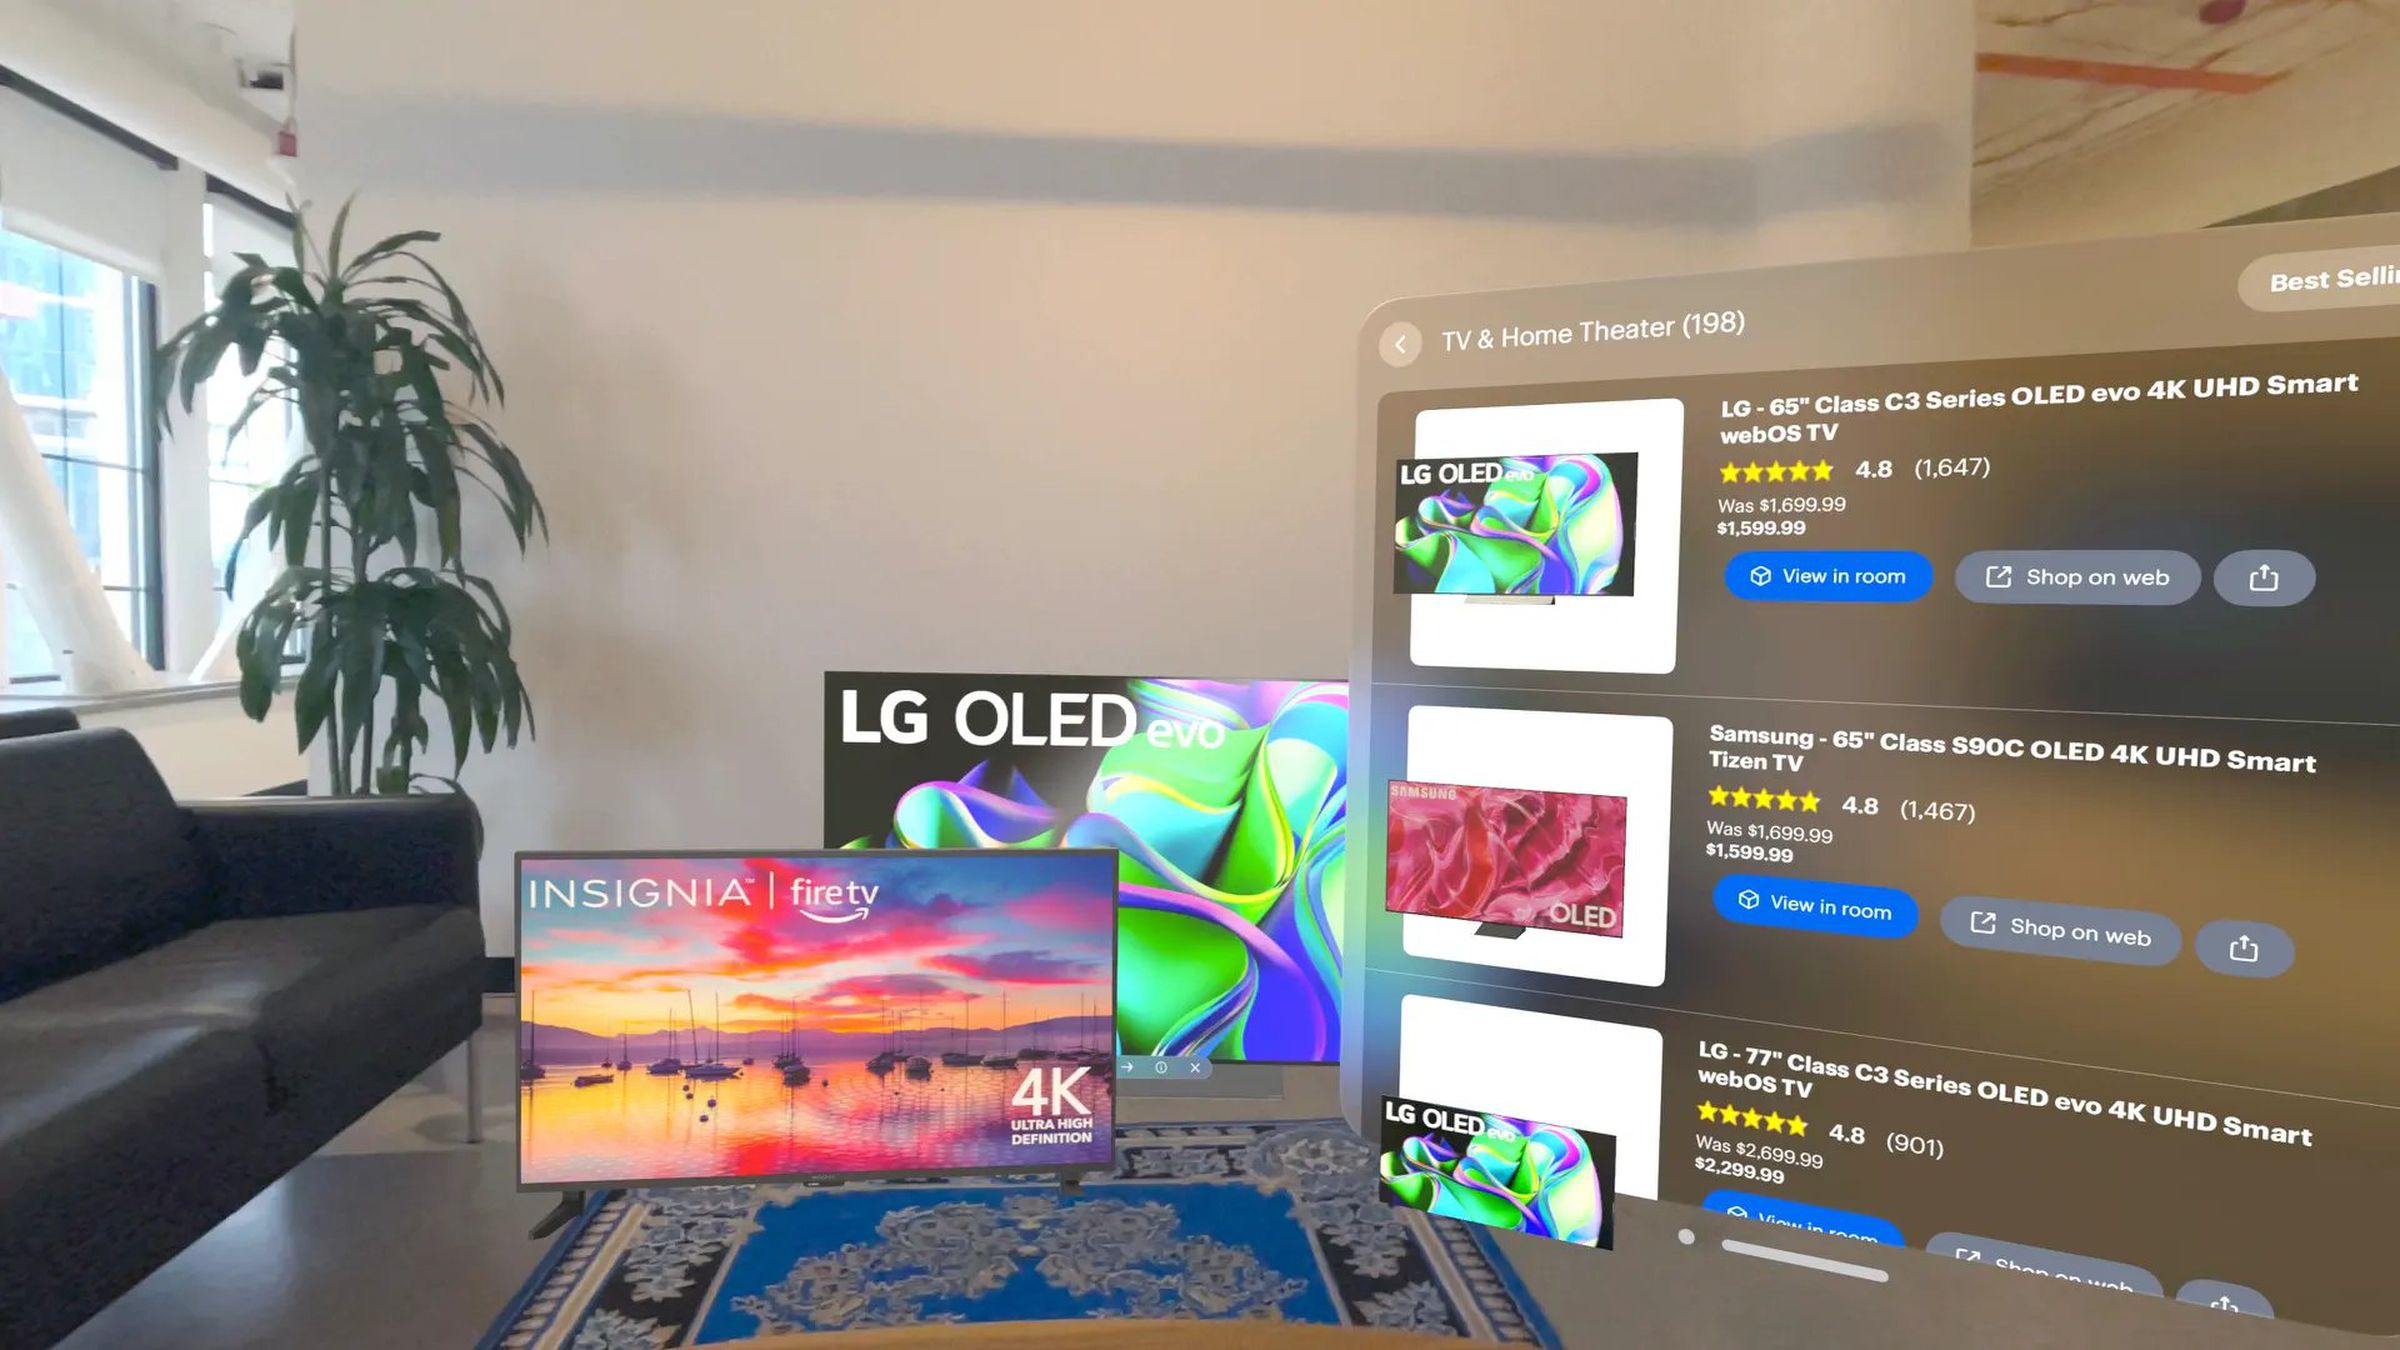 Simulated view of the Best Buy Vision Pro app projecting LG and Amazon TVs into a living room setting next to a page of Best Buy product listings with details and prices.